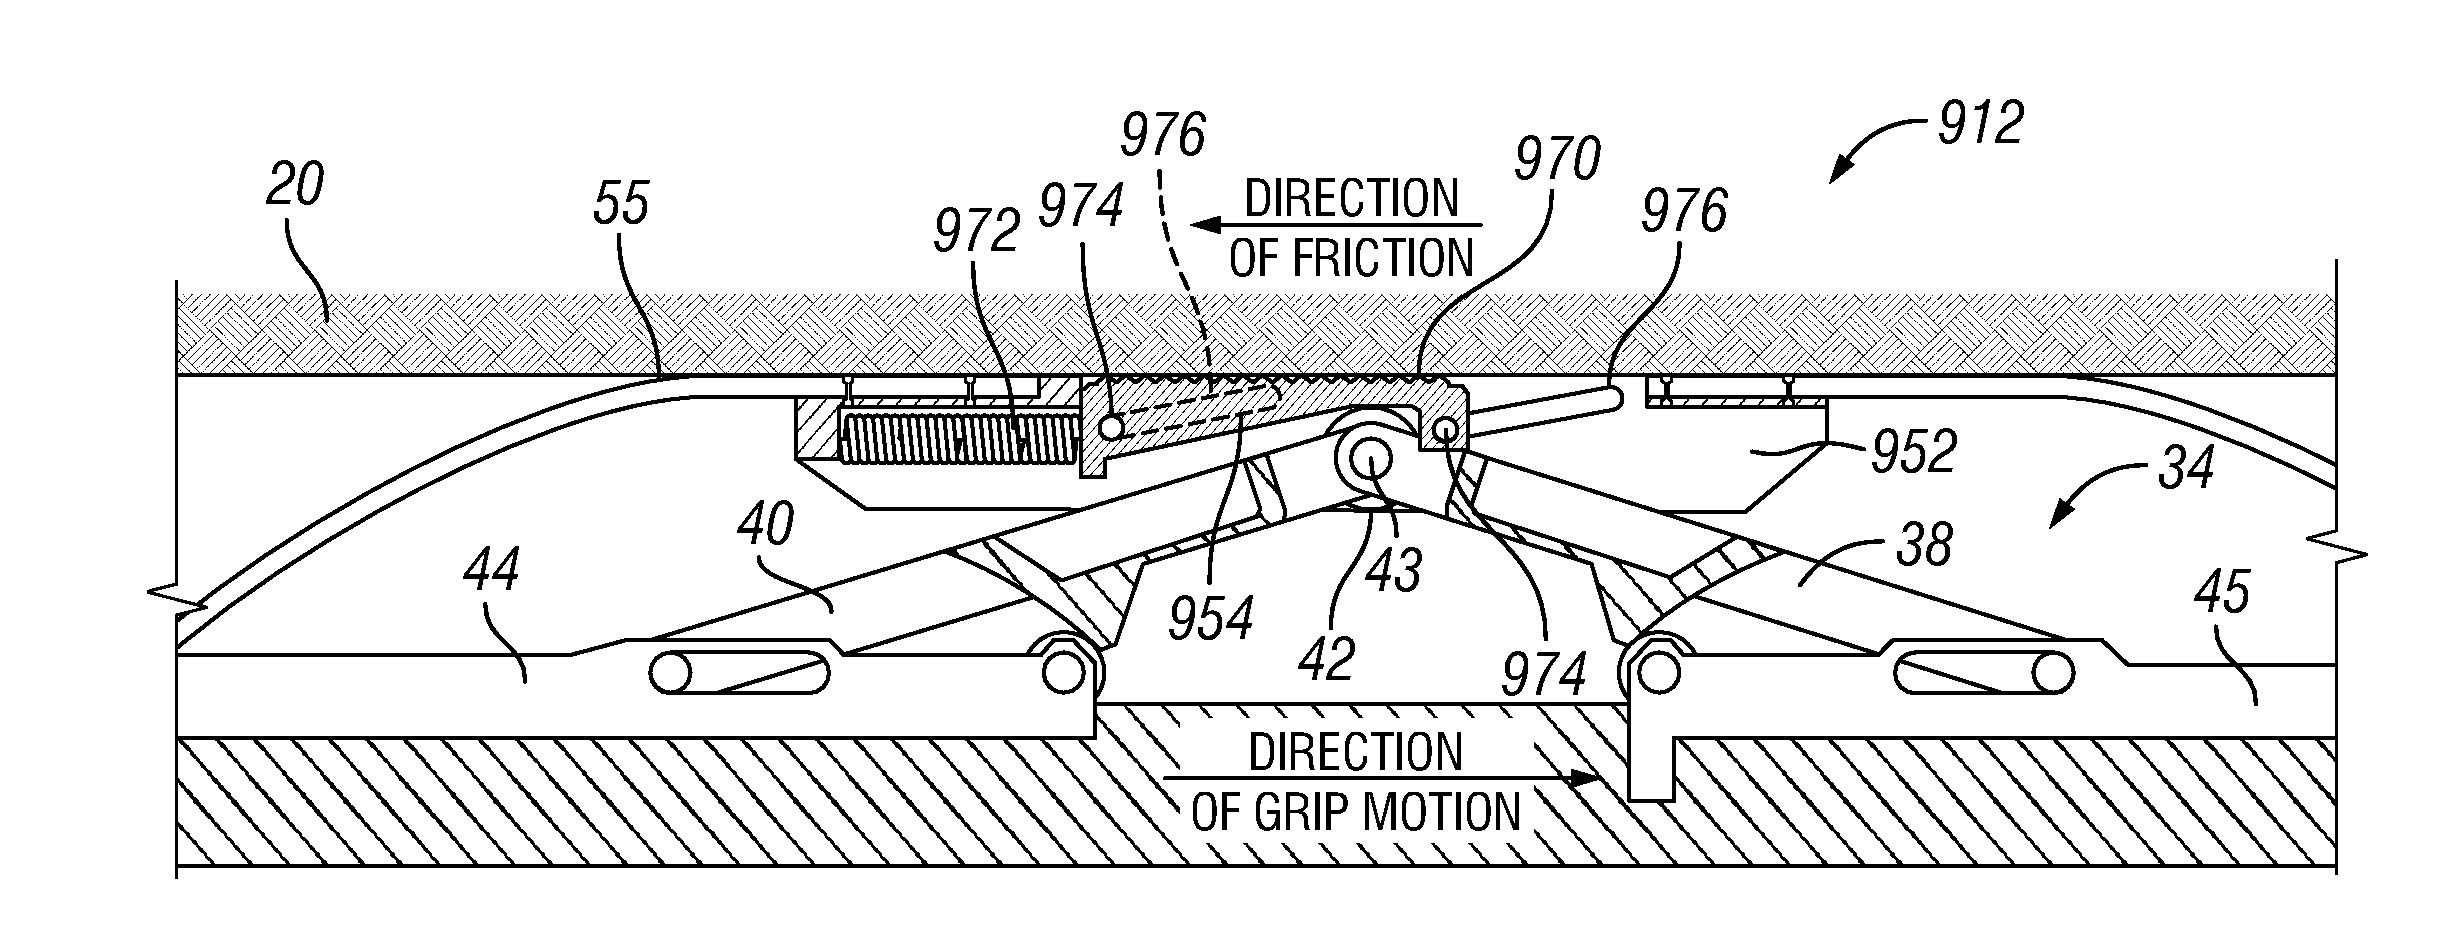 Self-anchoring device with force amplification